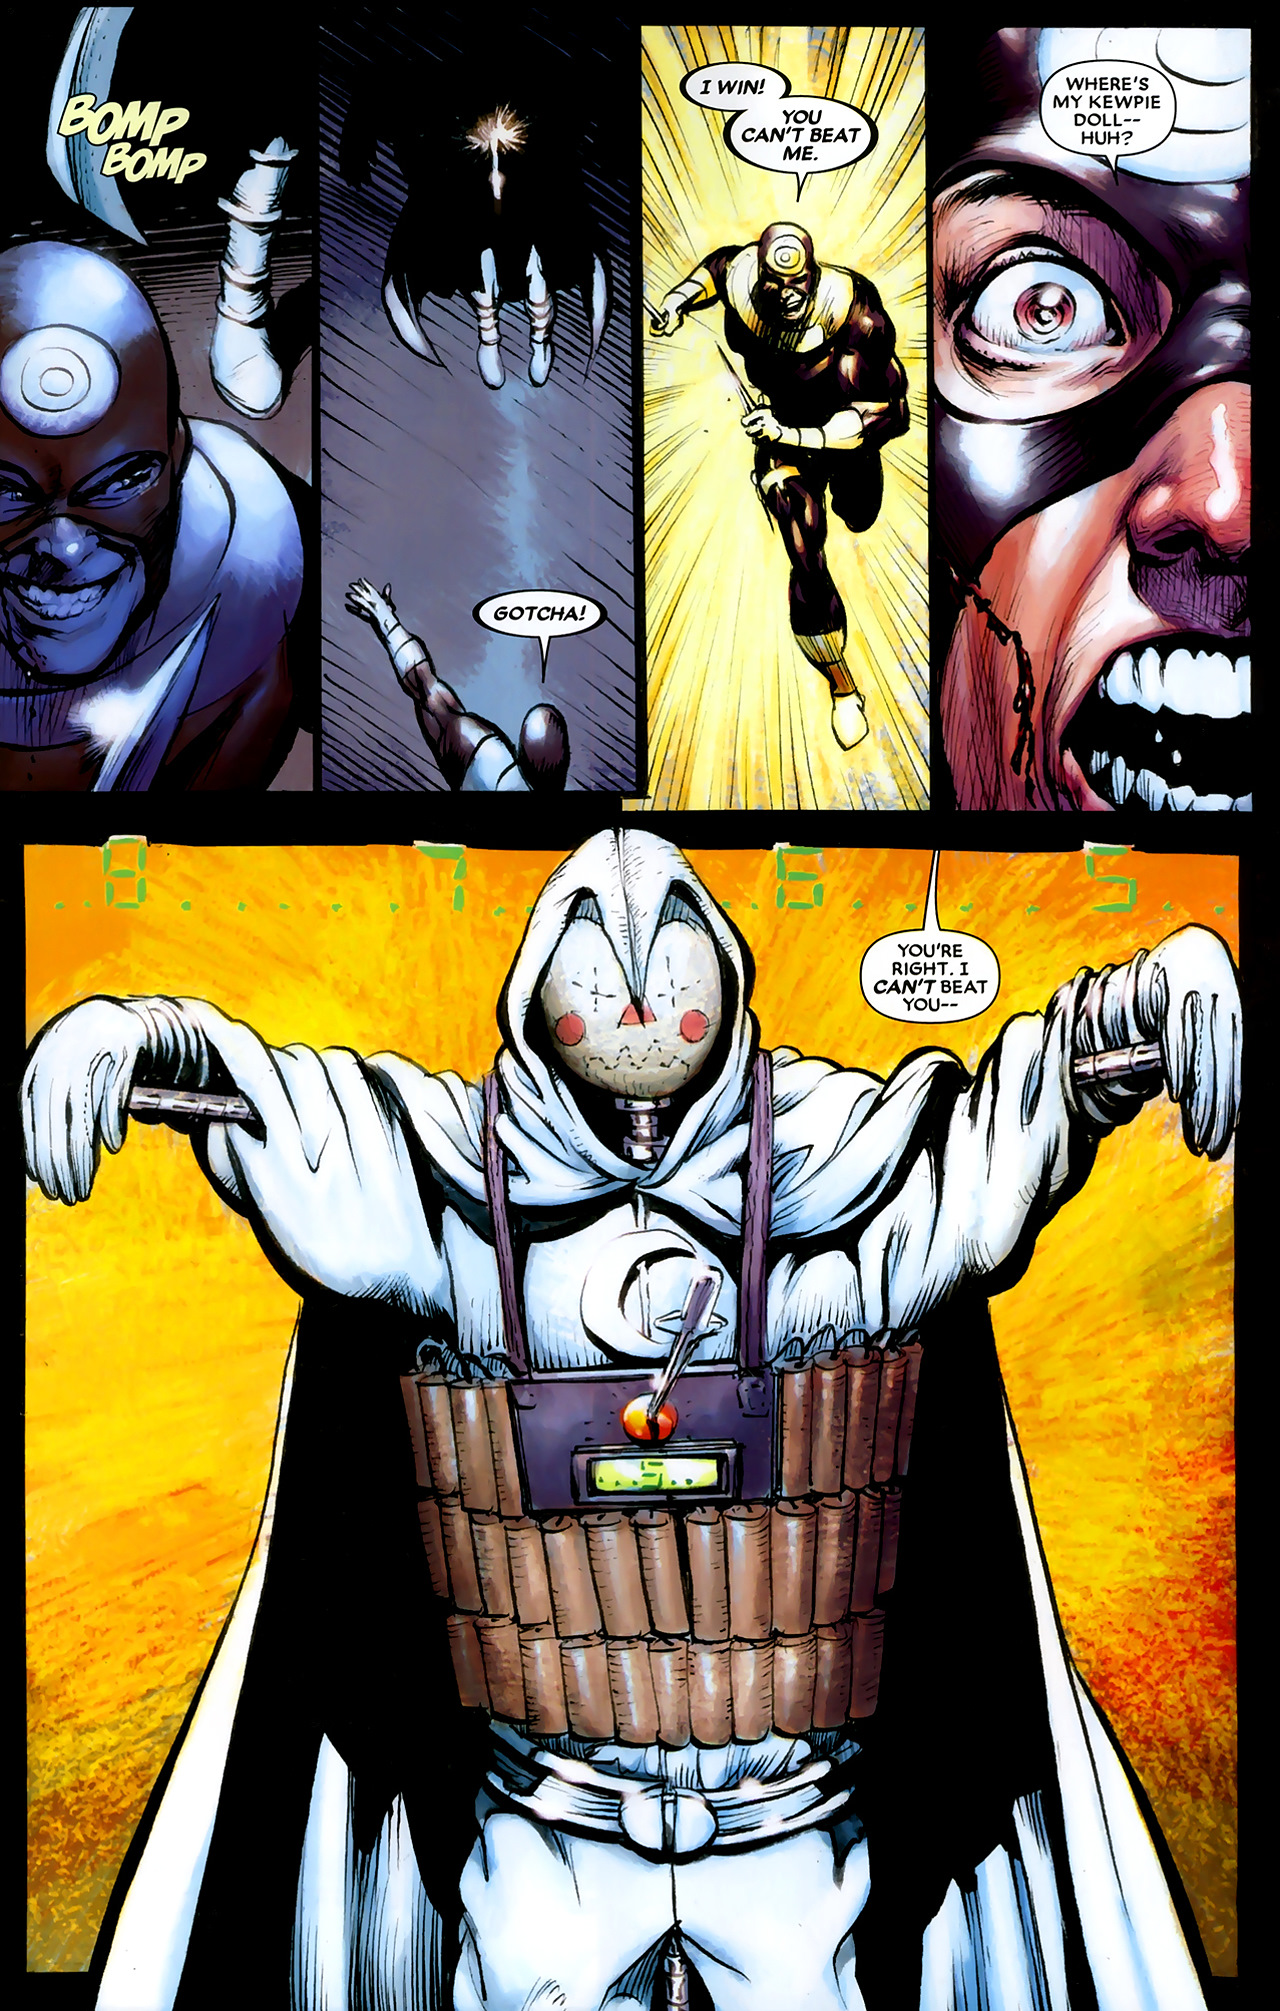 Moon Knight #25 - The Death Of Marc Spector, Part 5: Conclusion